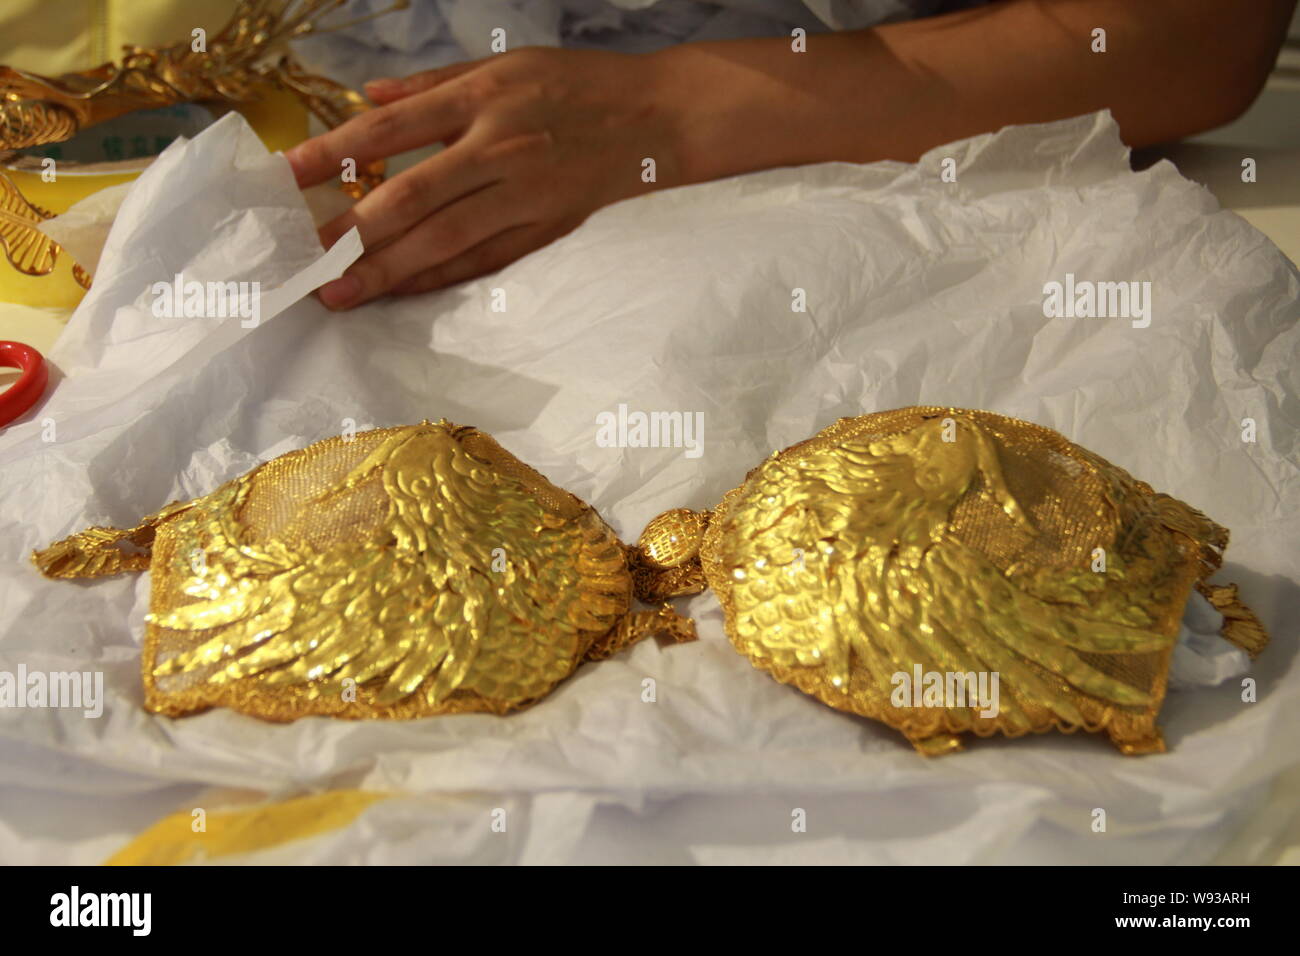 View of a golden bra which made of 960 grams of gold during an